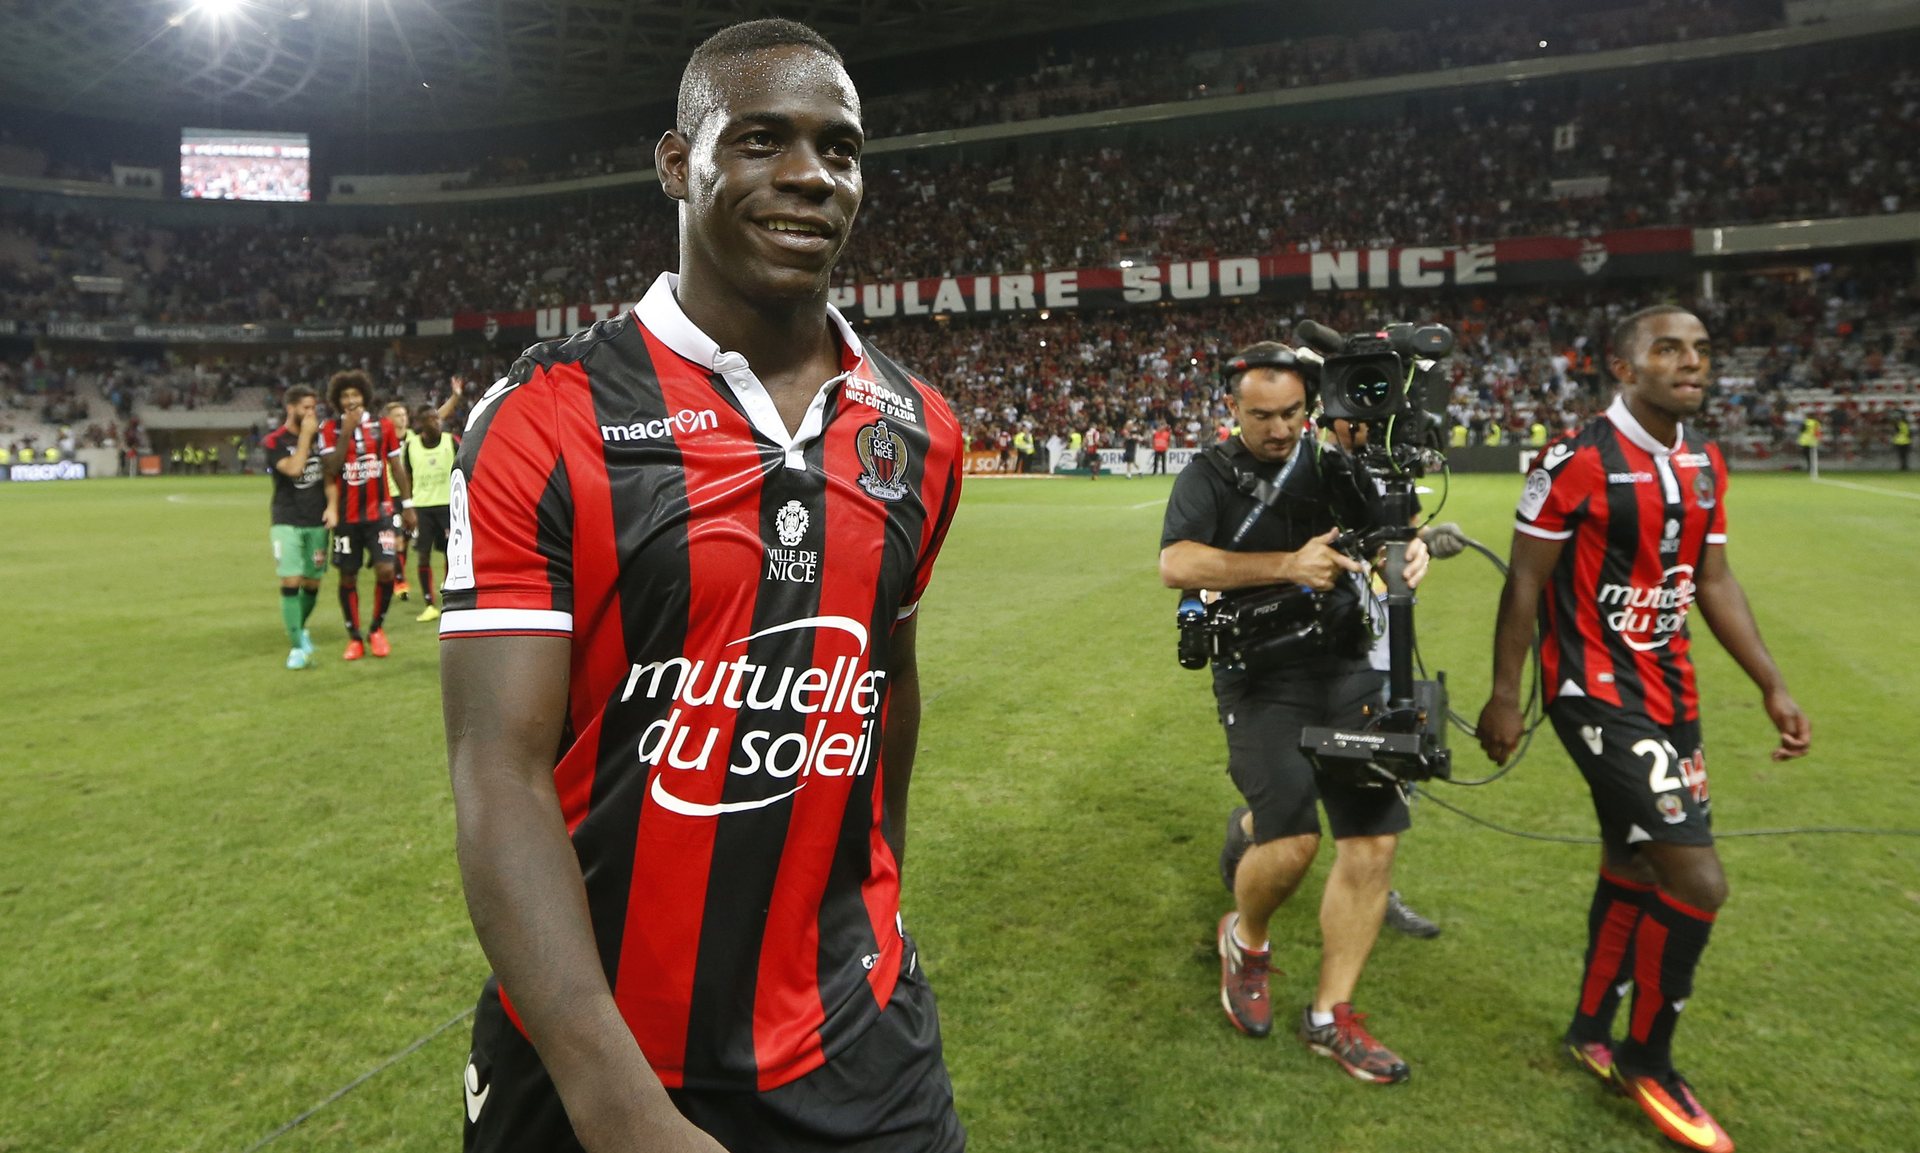 Balotelli scores twice on Nice debut to earn victory